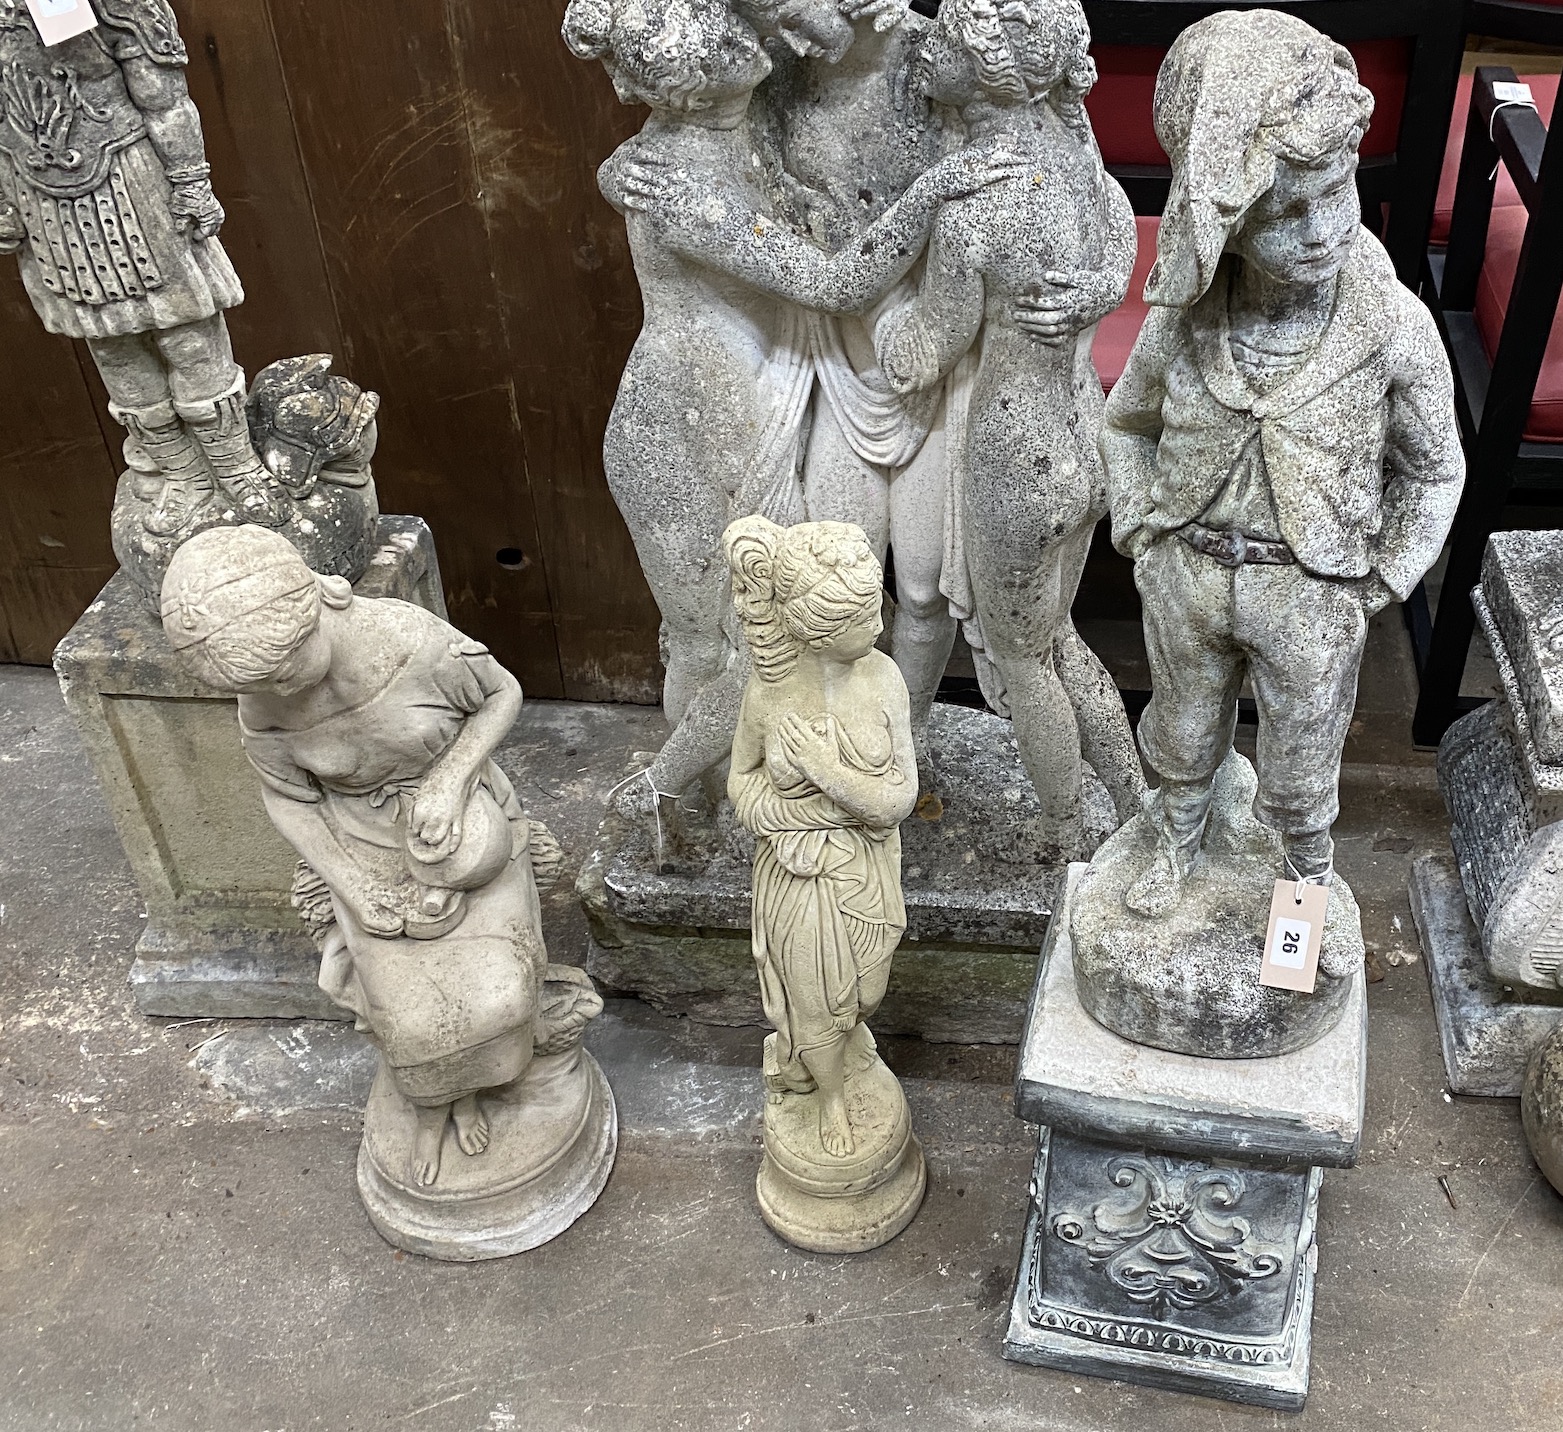 Three reconstituted stone garden statues, one on a square plinth, tallest 99cm